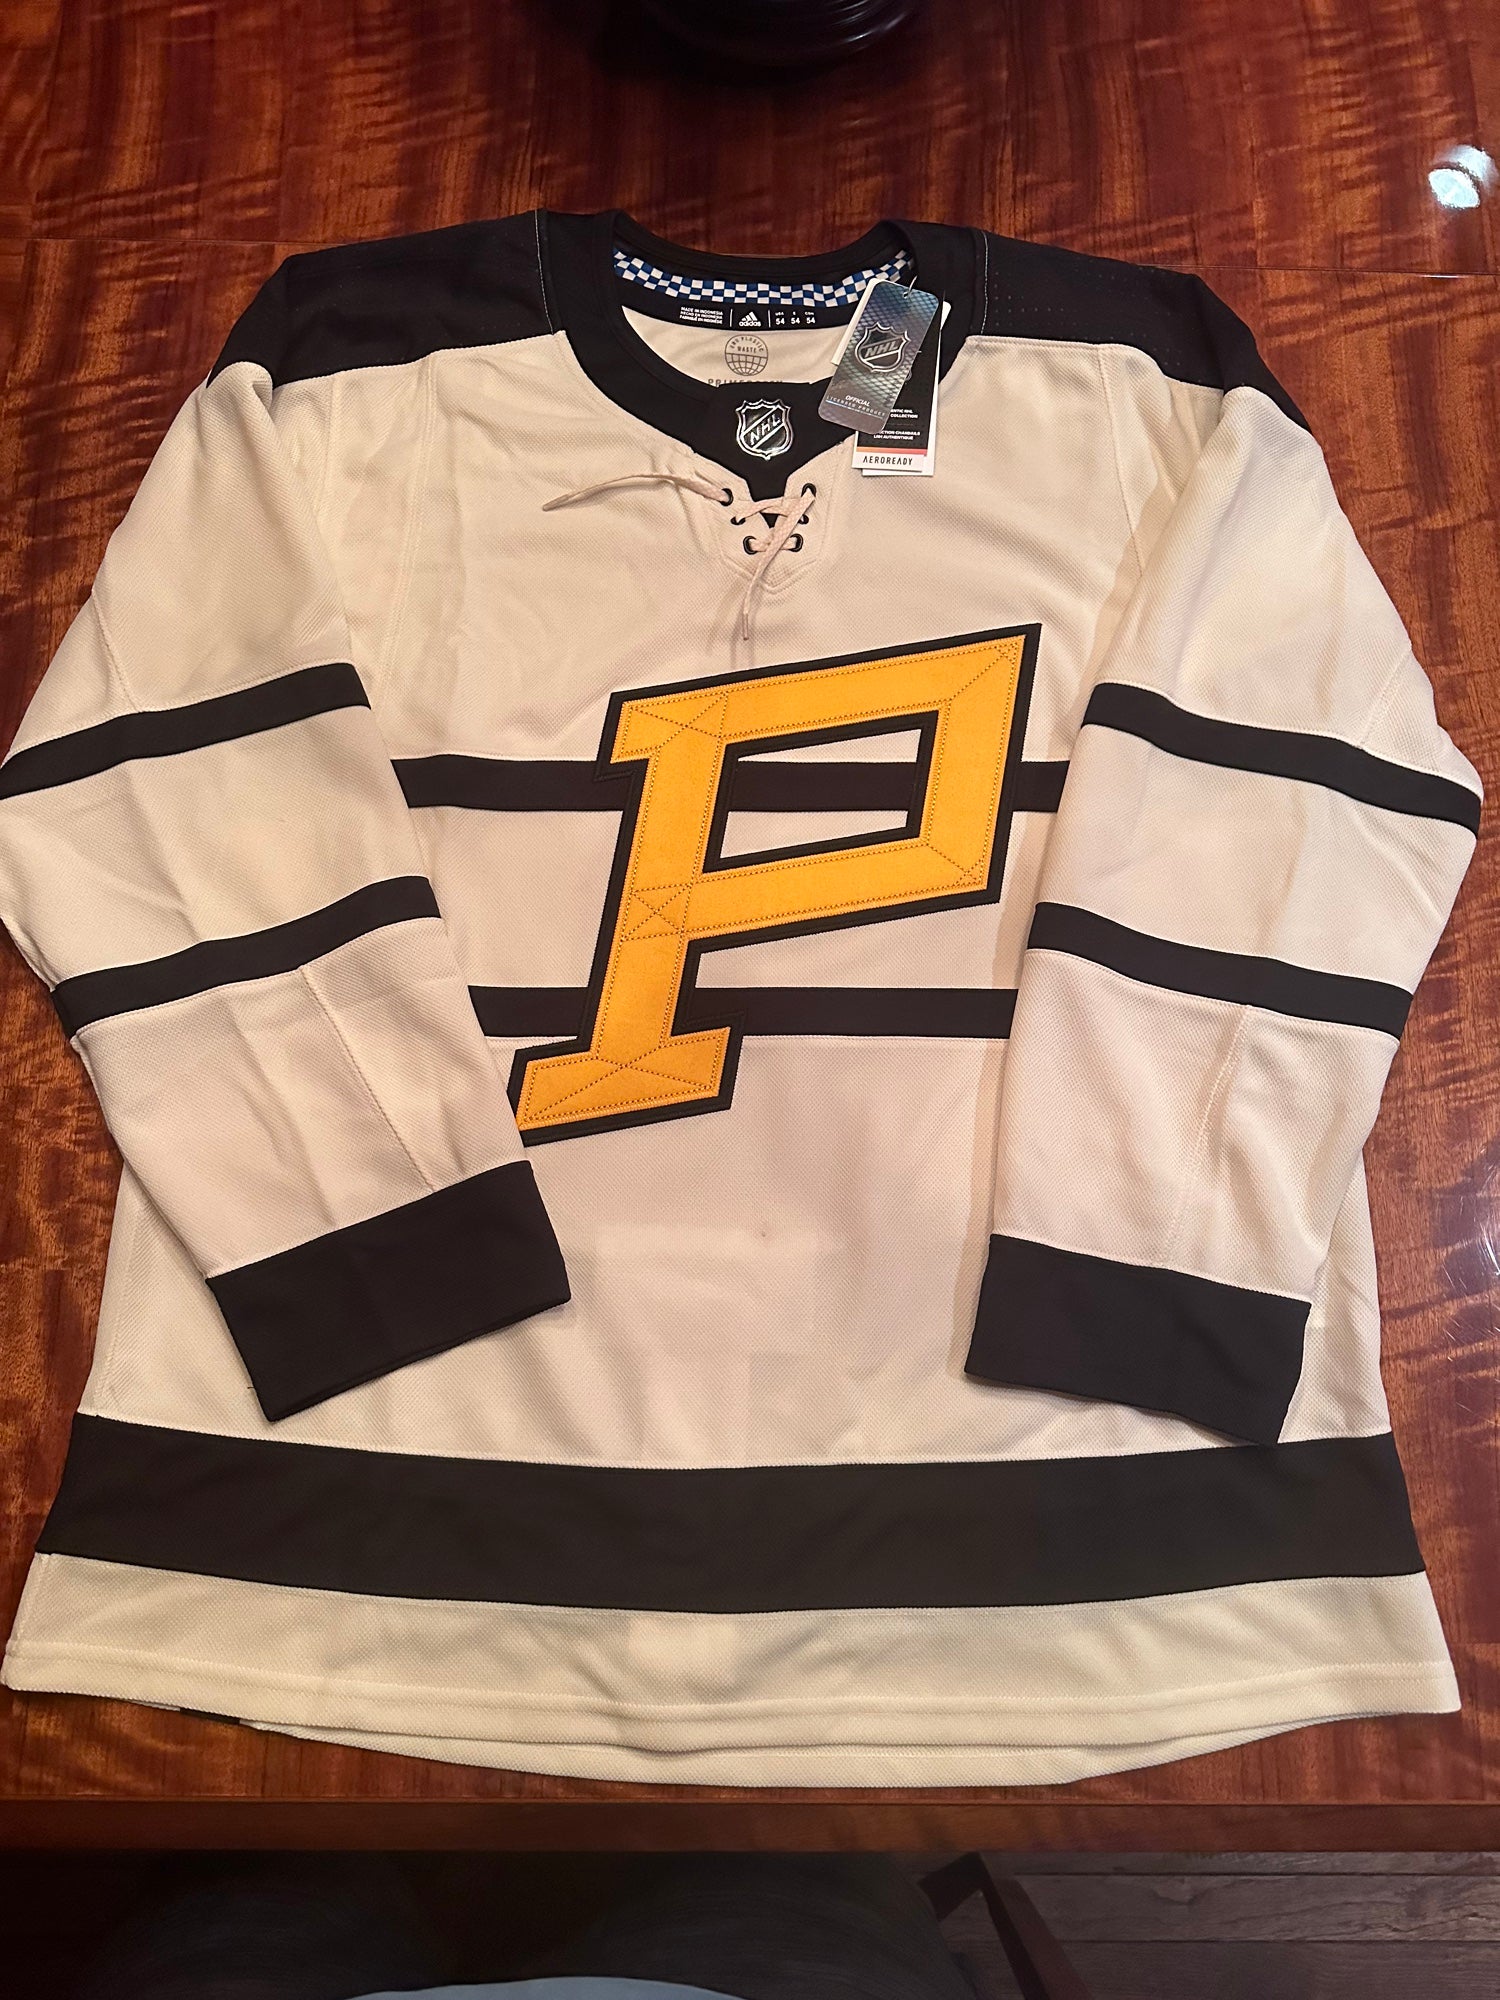 PITTSBURGH PENGUINS 2023 WINTER CLASSIC ADIDAS HOCKEY JERSEY sz 56 NWT  w/patch